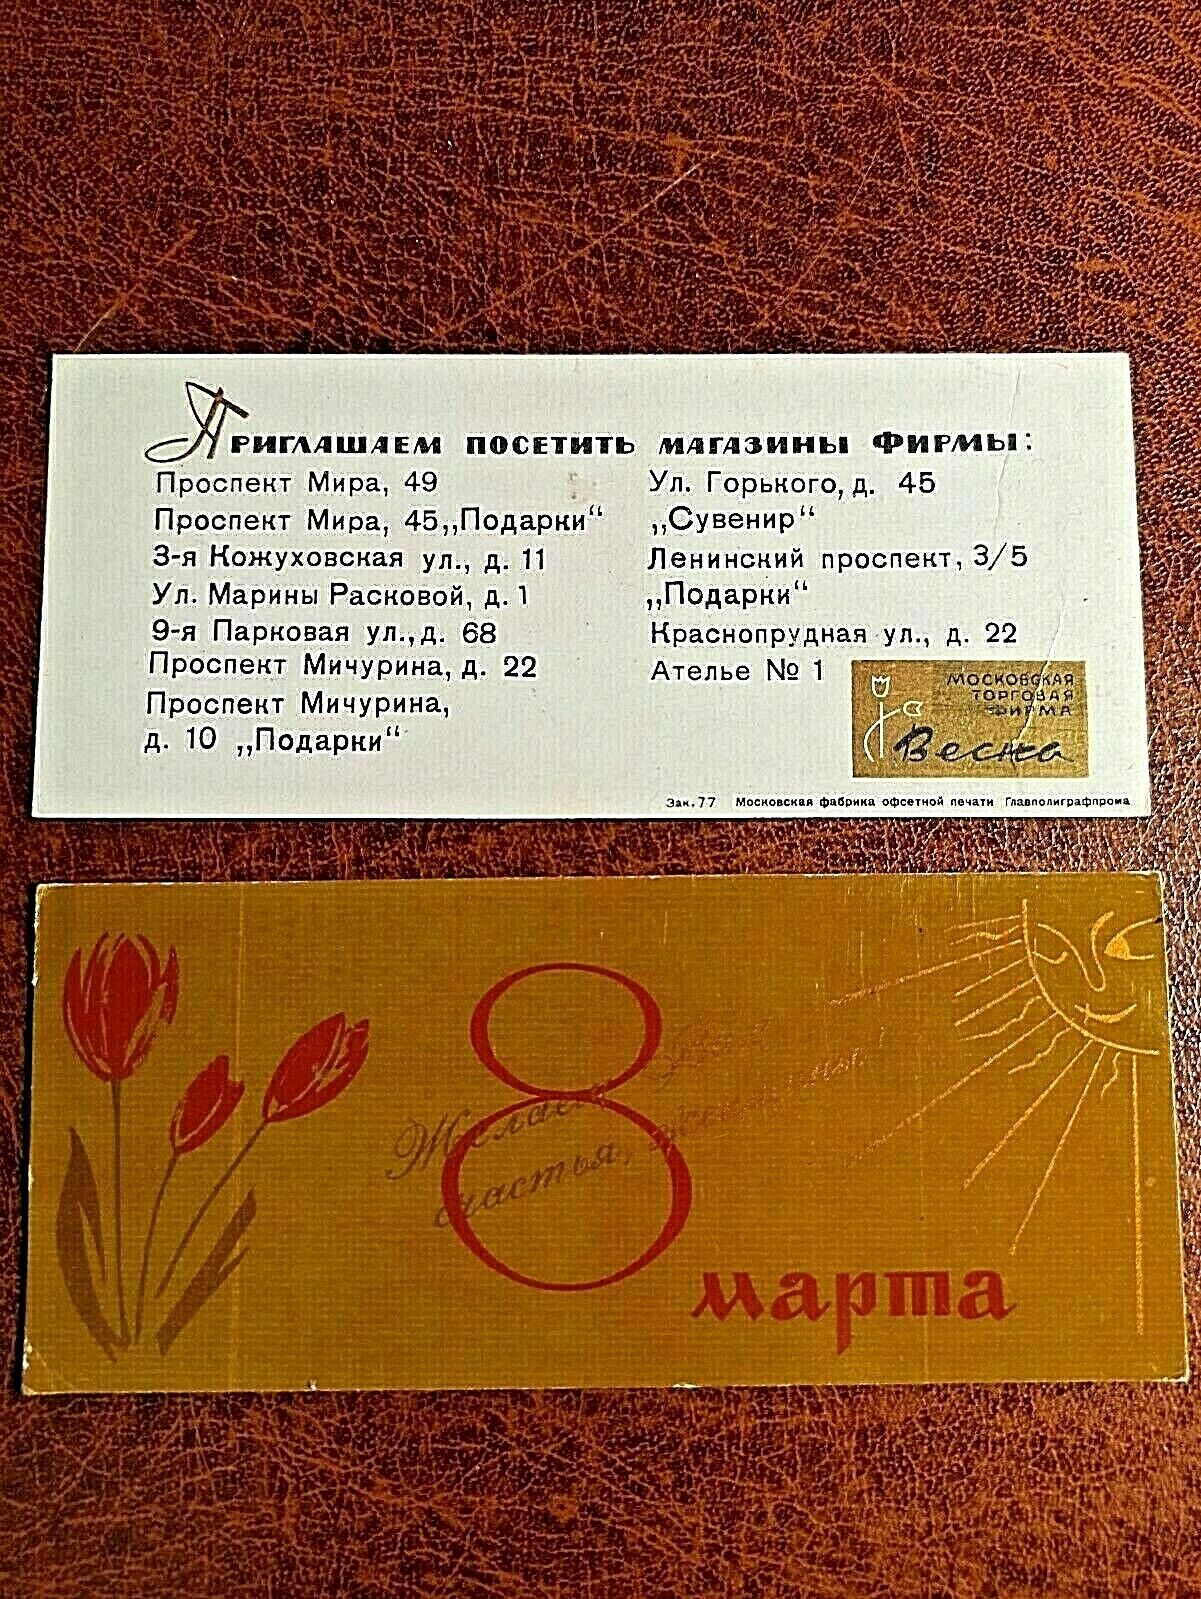 An invitation to visit the Vesna stores. Original. Moscow. 1980s USSR